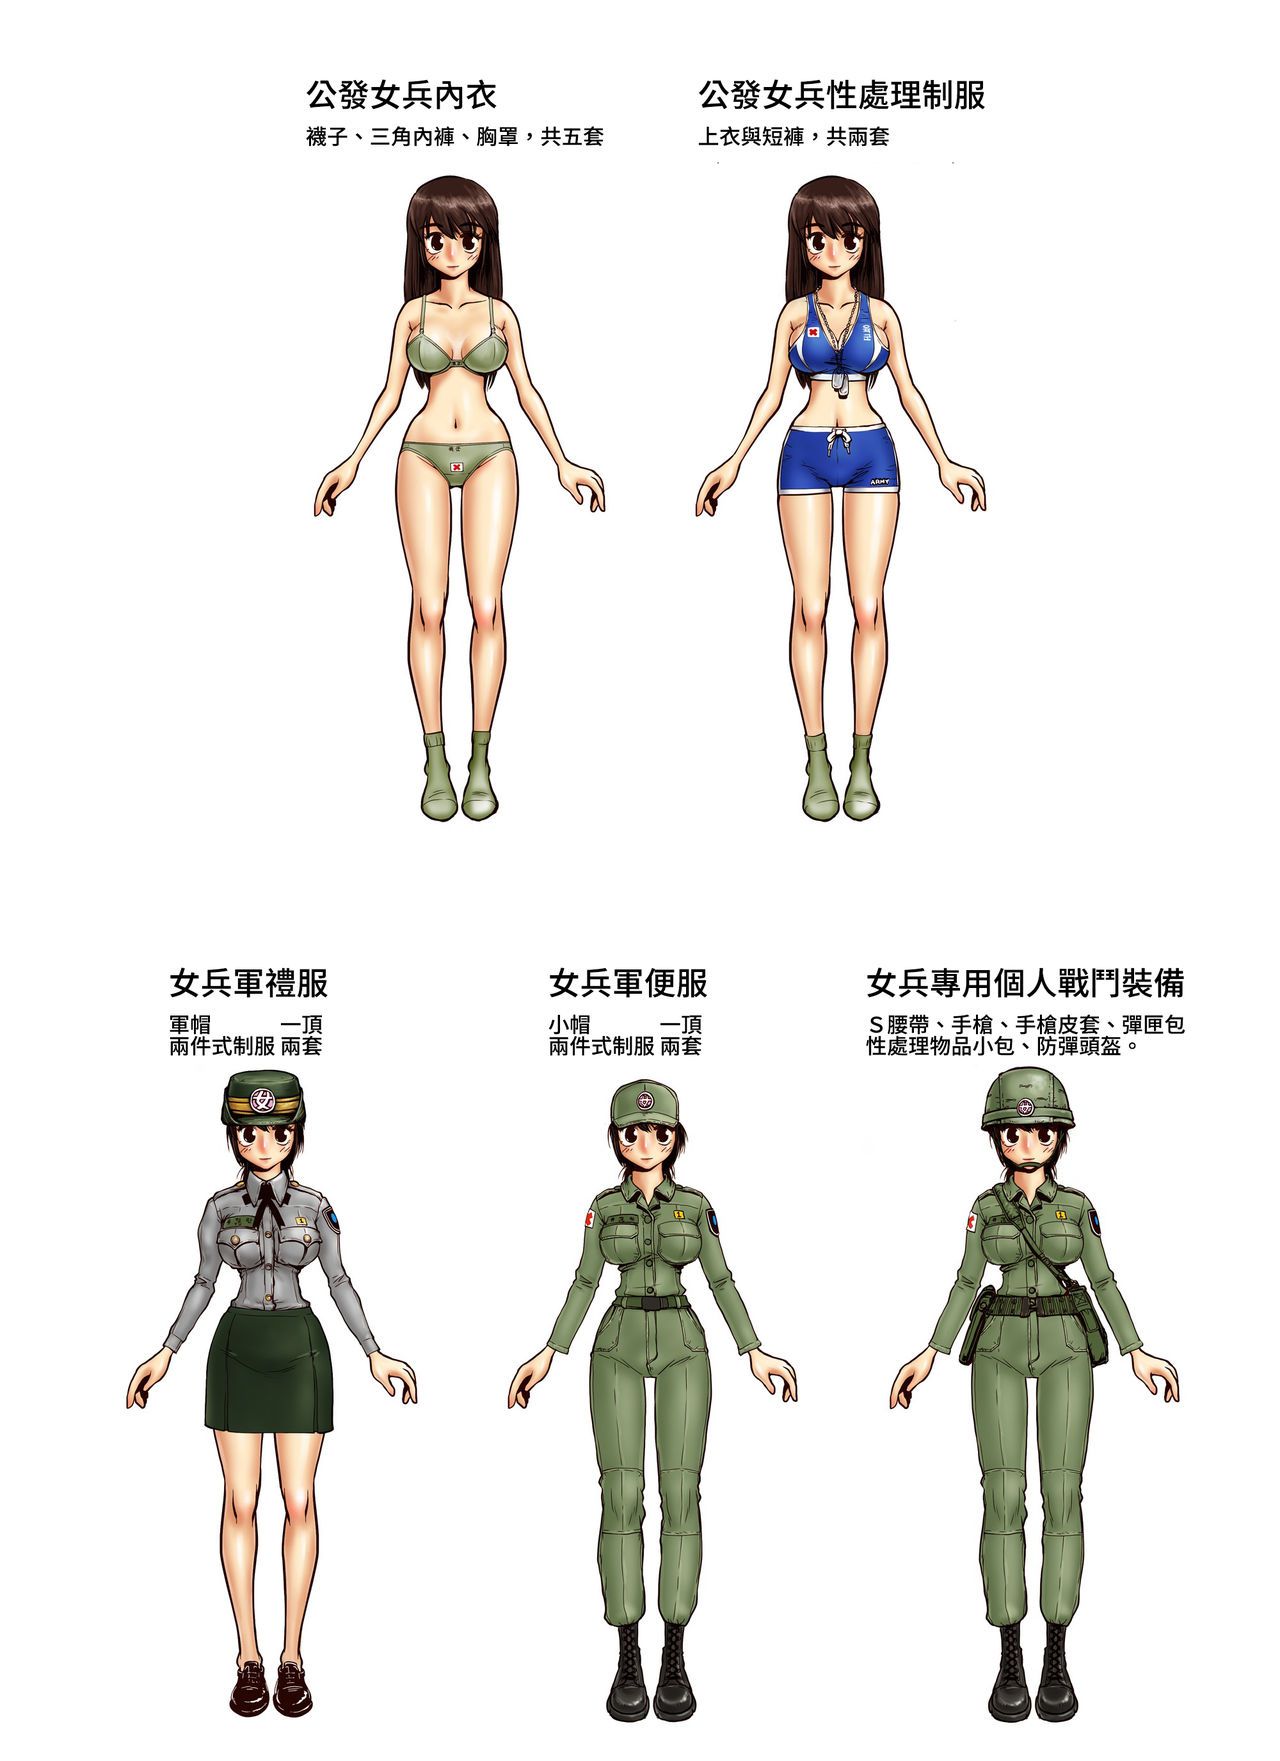 [GOGOCHERRY] Hell of female soldier|女兵地獄 (Ongoing)[Chinese][張順瑋個人漢化] 4